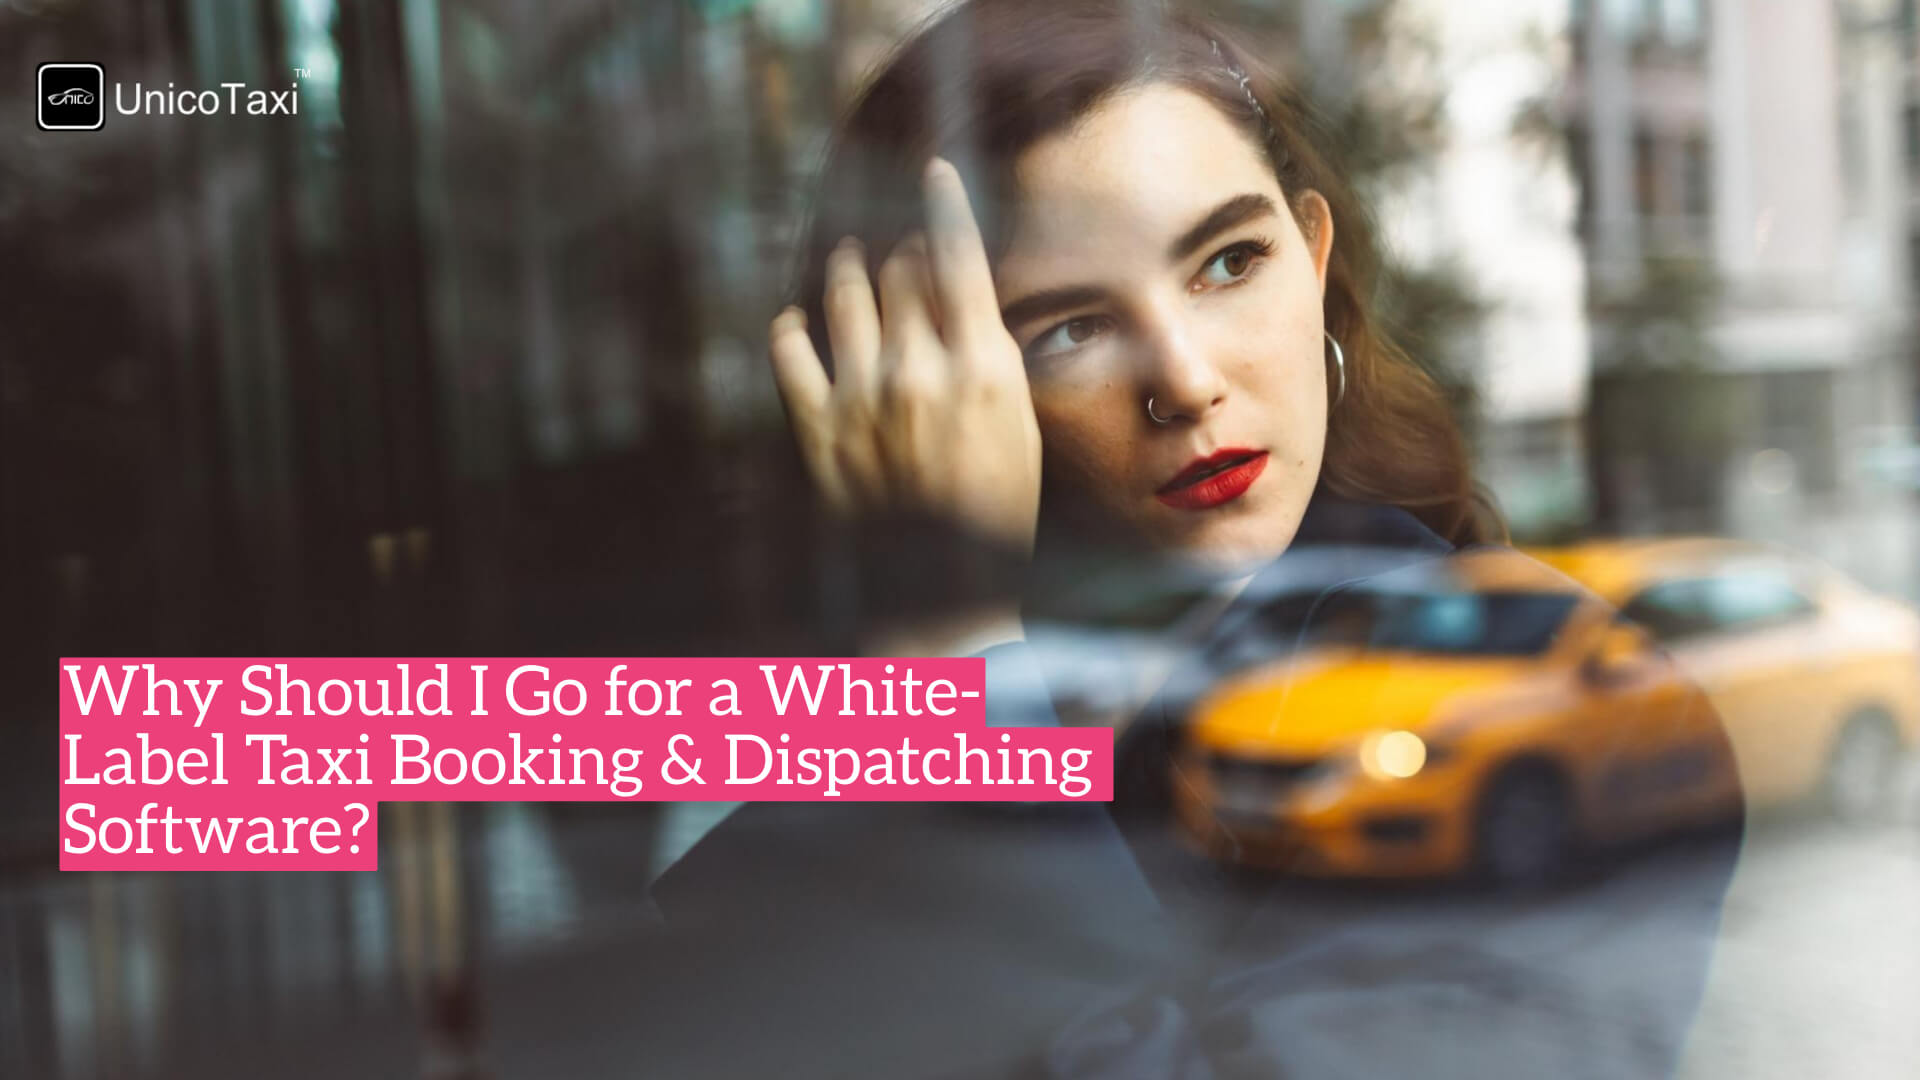 Why Should I Go for a White-Label Taxi Booking & Dispatching Software?